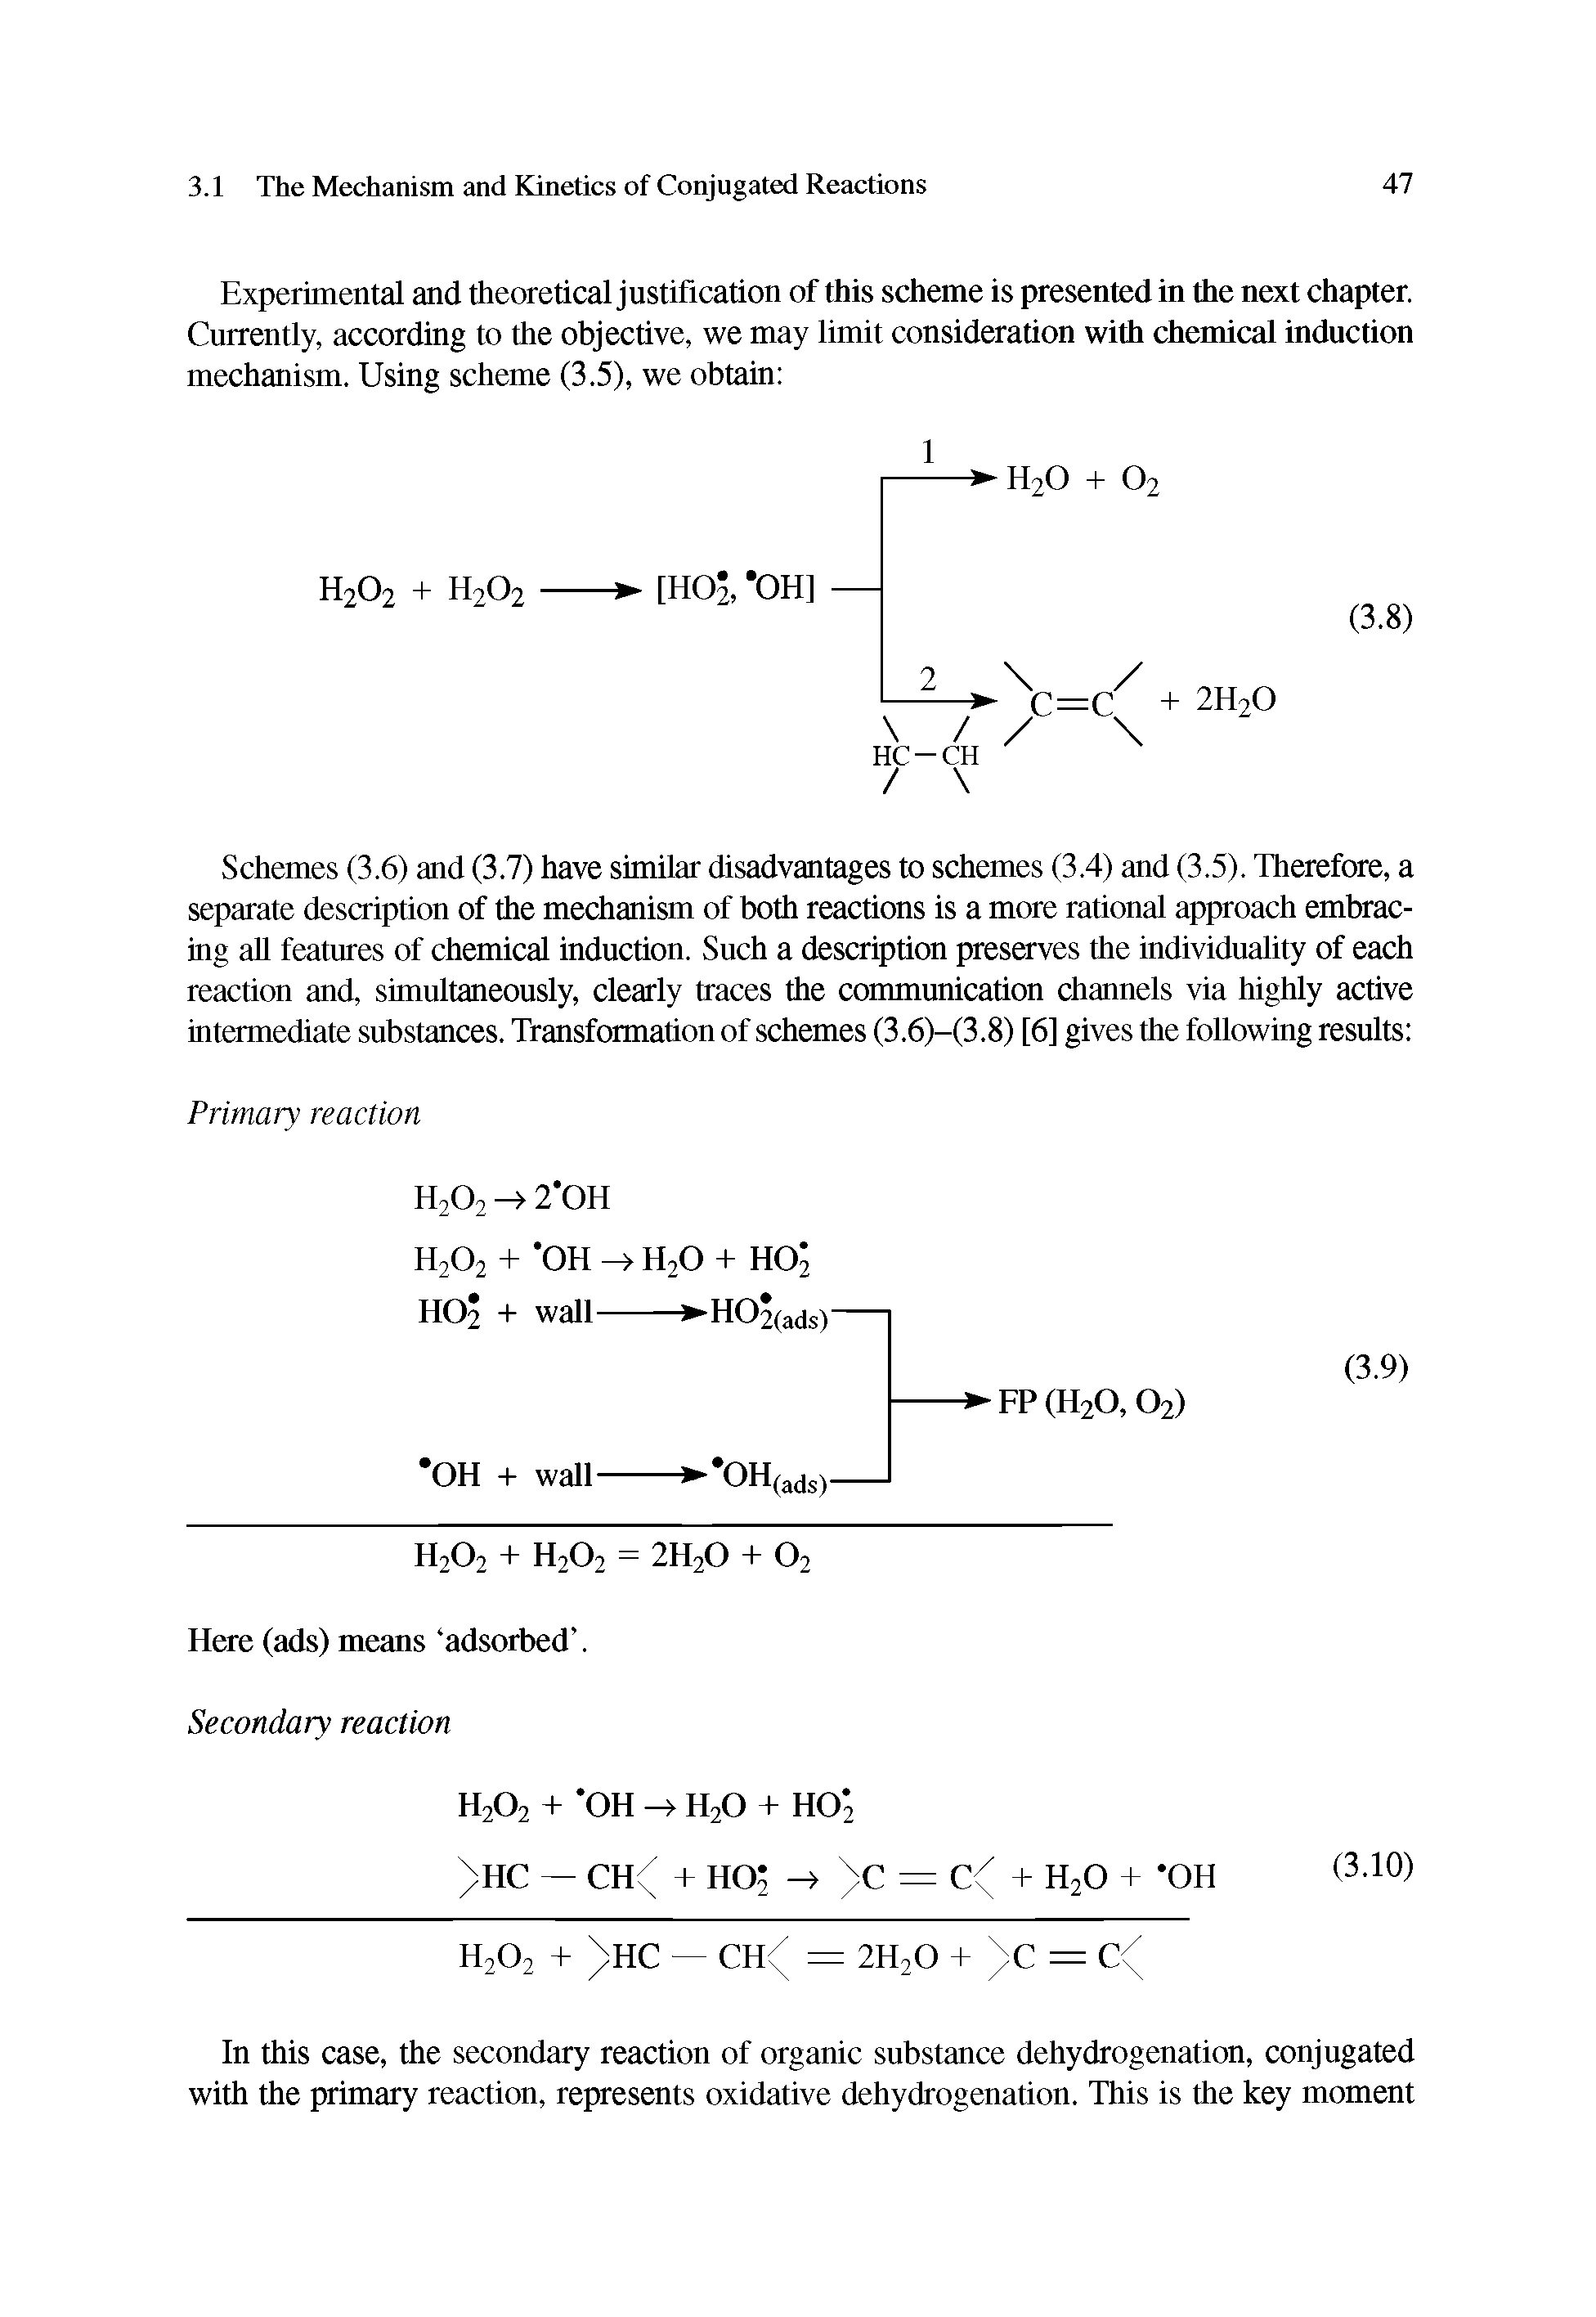 Schemes (3.6) and (3.7) have similar disadvantages to schemes (3.4) and (3.5). Therefore, a separate description of the mechanism of both reactions is a more rational approach embracing all features of chemical induction. Such a description preserves the individuality of each reaction and, simultaneously, clearly traces the communication channels via highly active intermediate substances. Transformation of schemes (3.6)—(3.8) [6] gives the following results ...